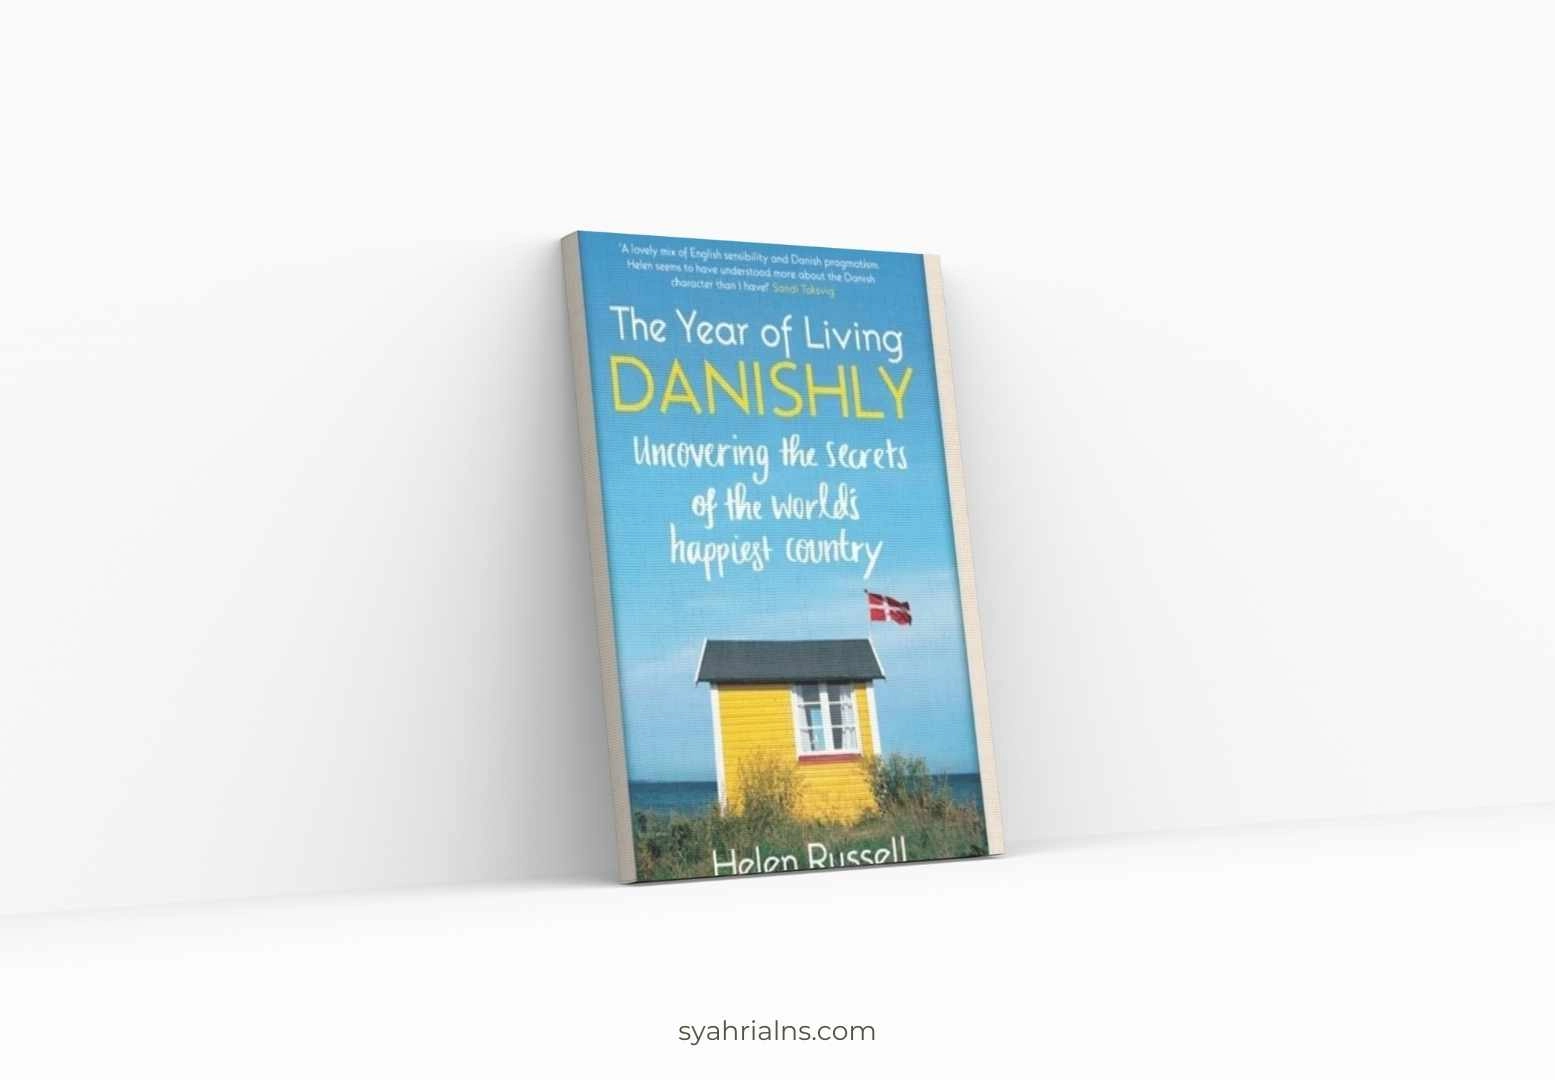 The Year of Living Danishly by Helen Russell (Books like Eat Pray Love)